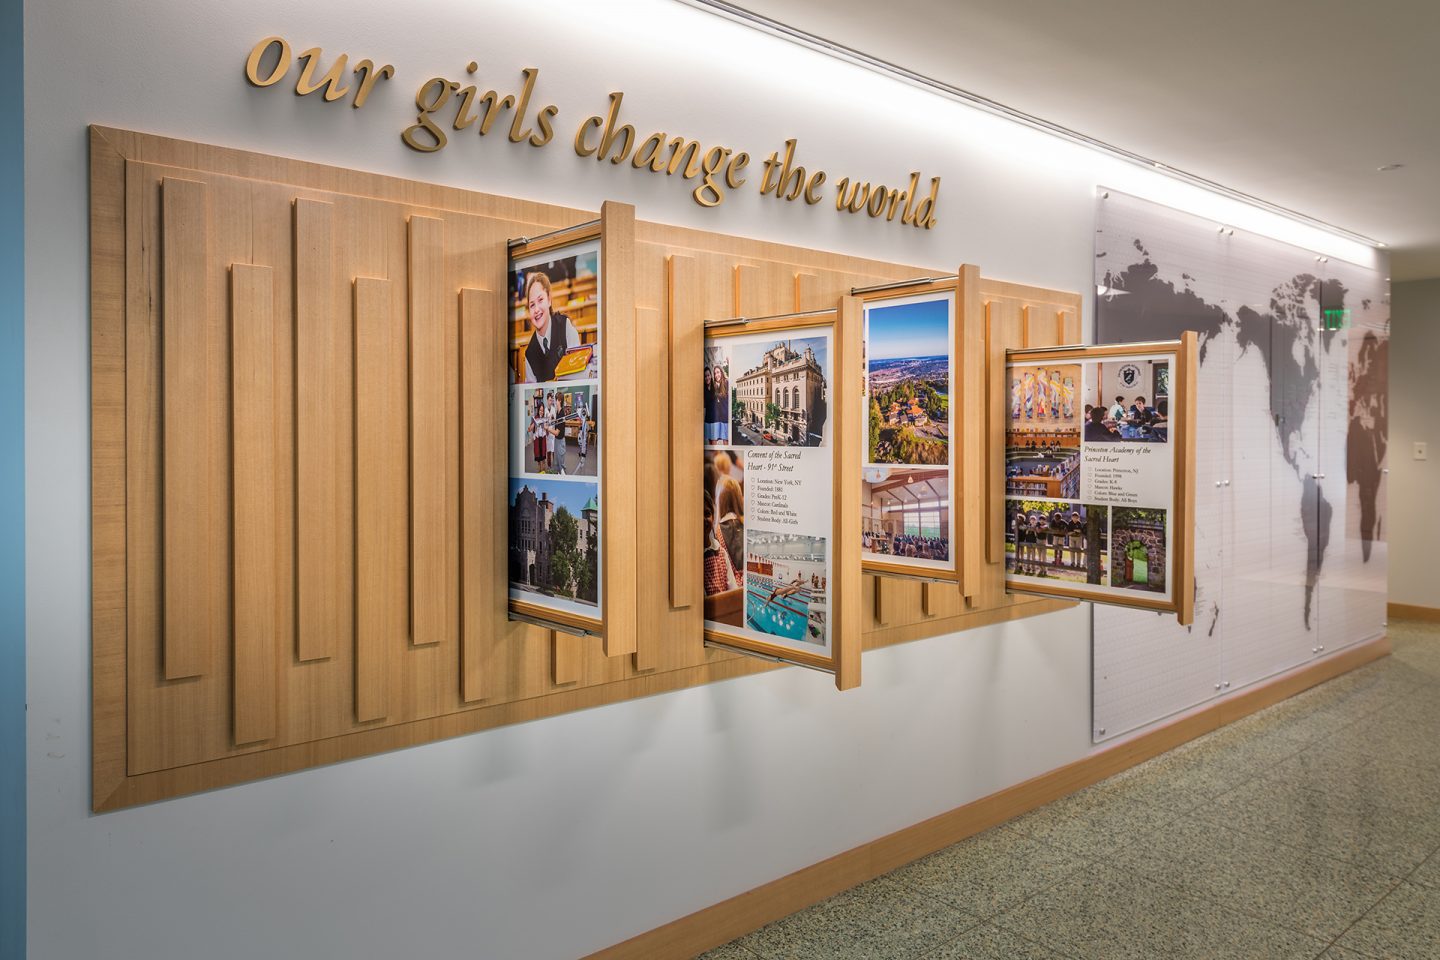 Image of interactive display. The sign above the display says "Our girls change the world."